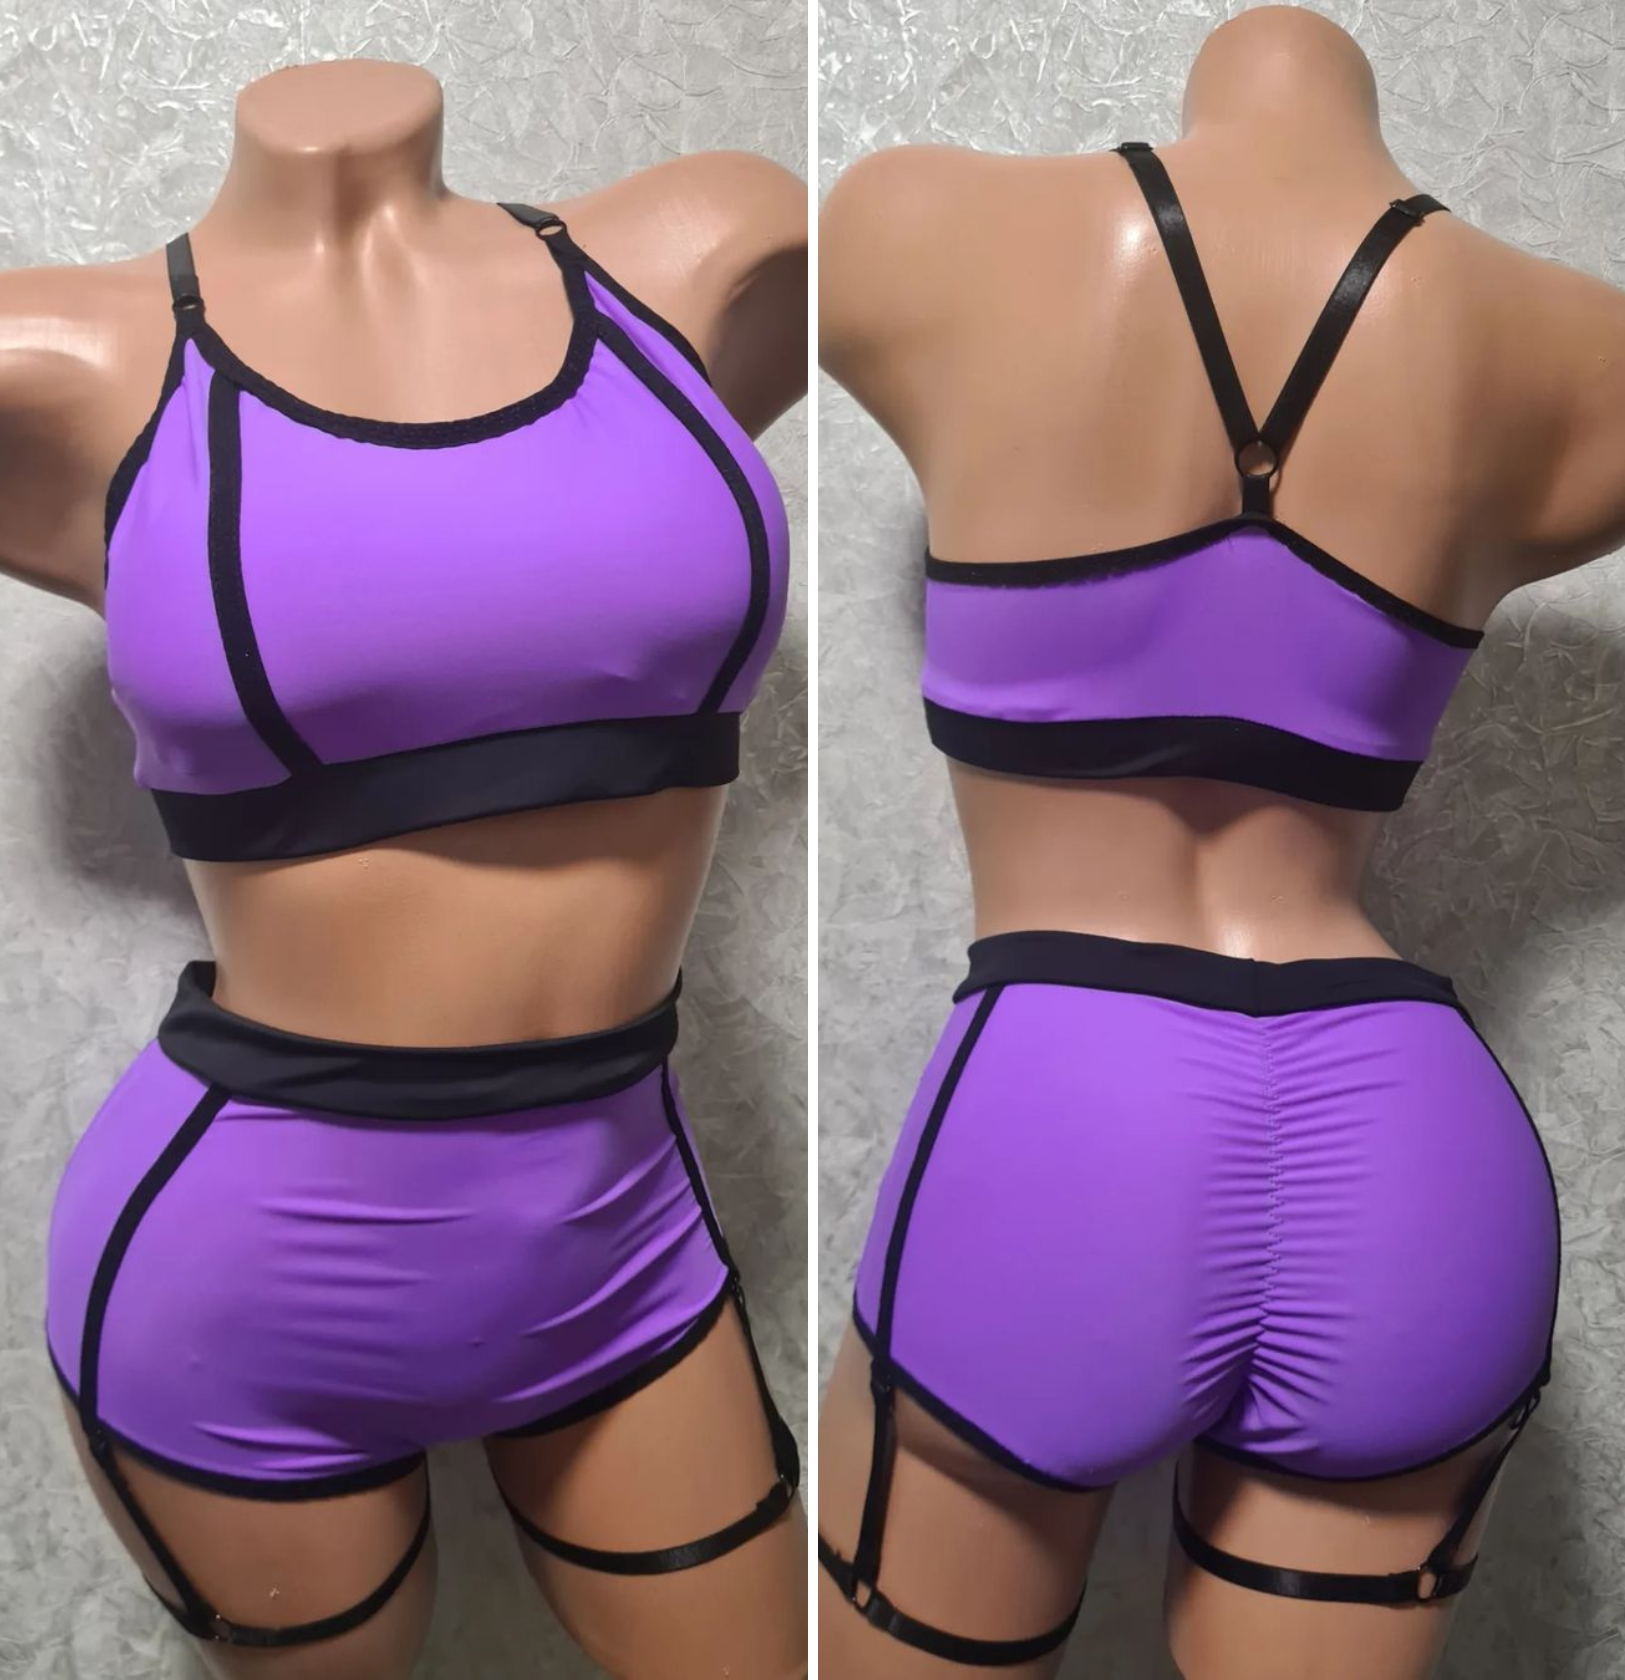 Pole Dance Wear Top and Shorts, 2pc, Workout Outfit, Polewear, Exotic Pole  Dance Costume, Club Wear, Gym Twerk Yoga Fitness Shorts Sport Bra 